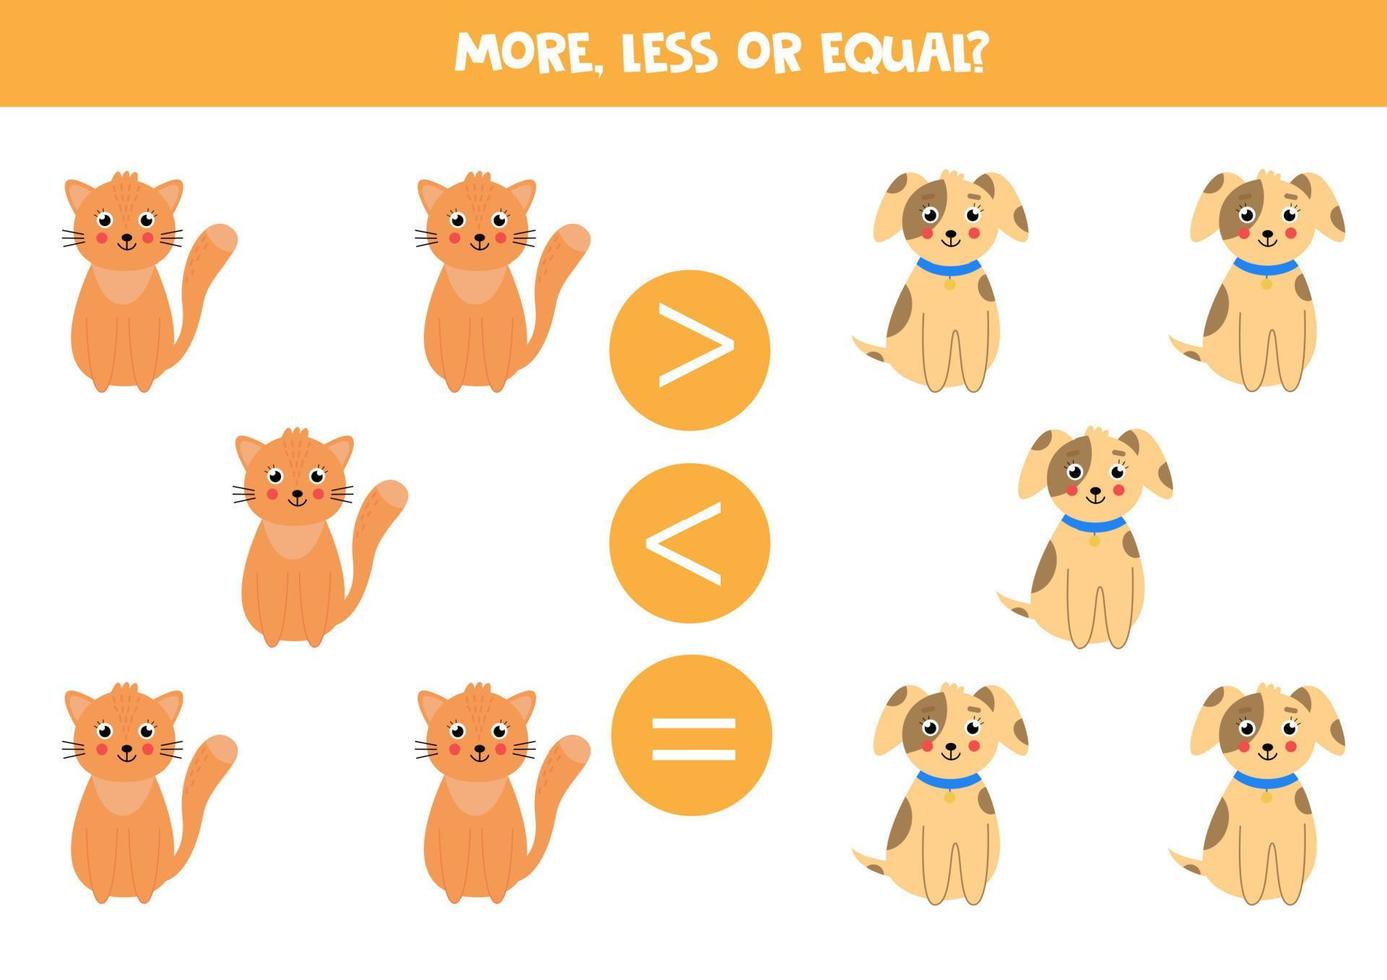 More, less or equal with cartoon cats and dogs. vector